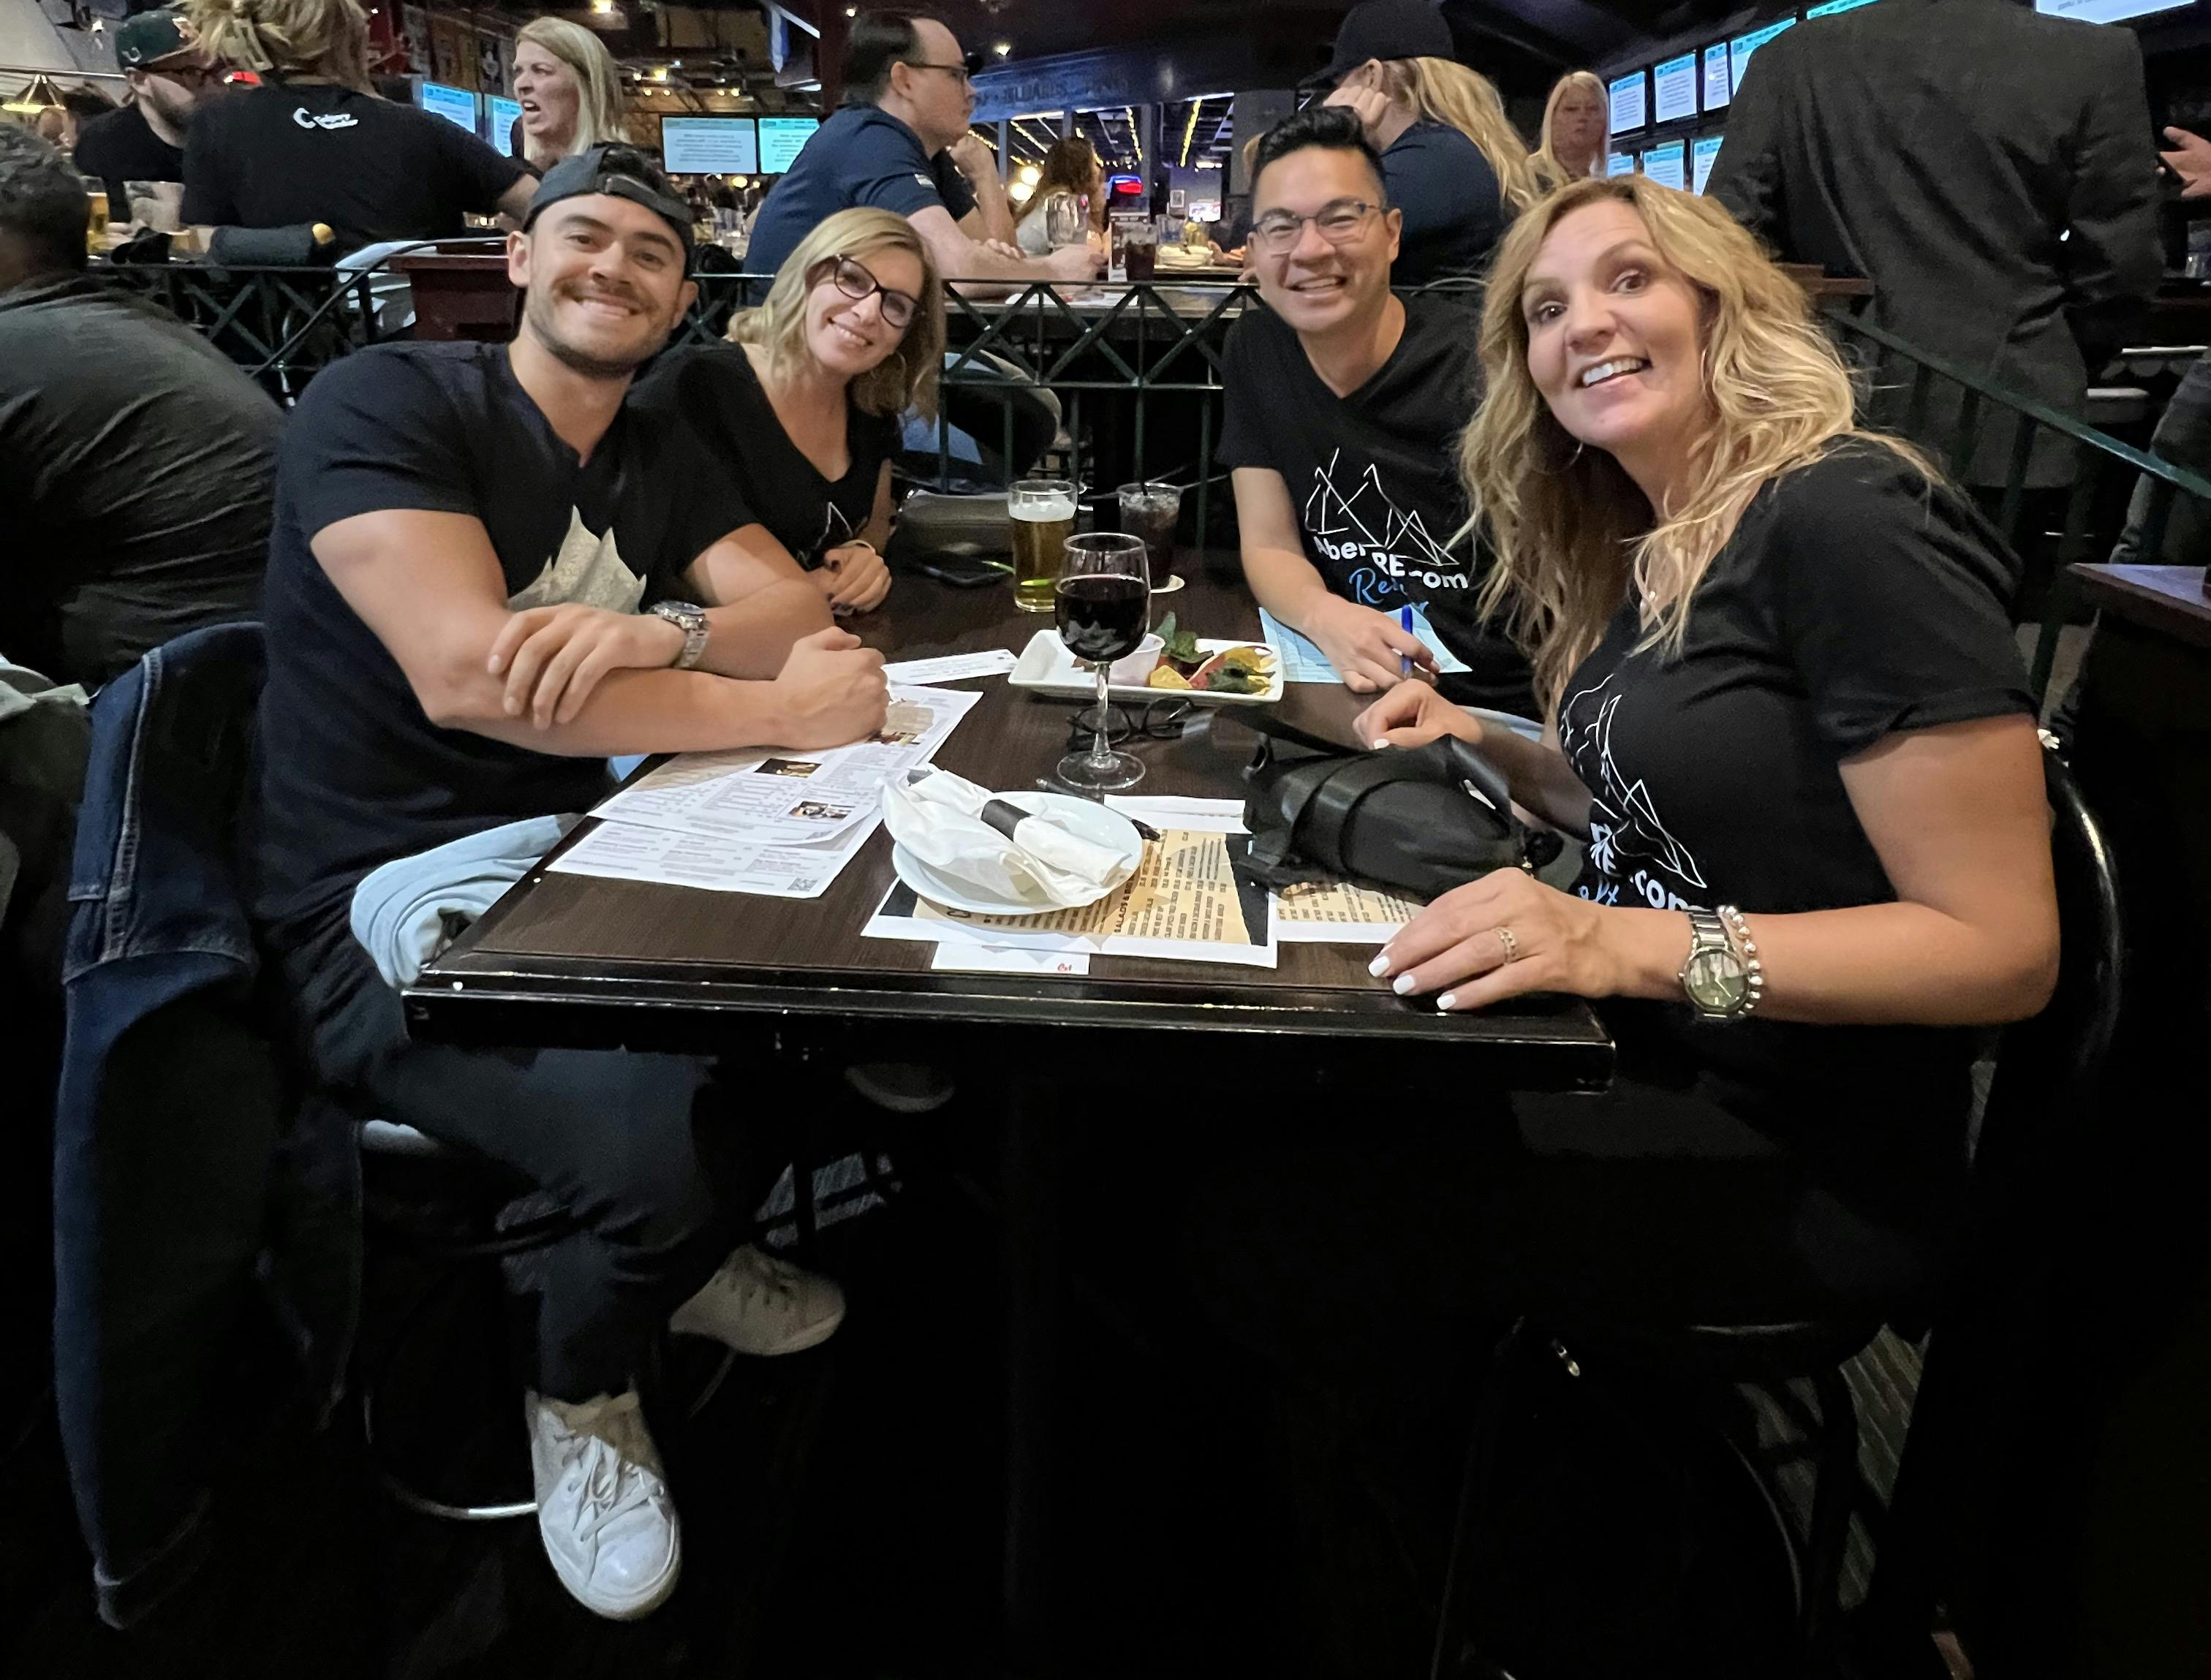 group of 4 people in black shirts at a trivia event smiling